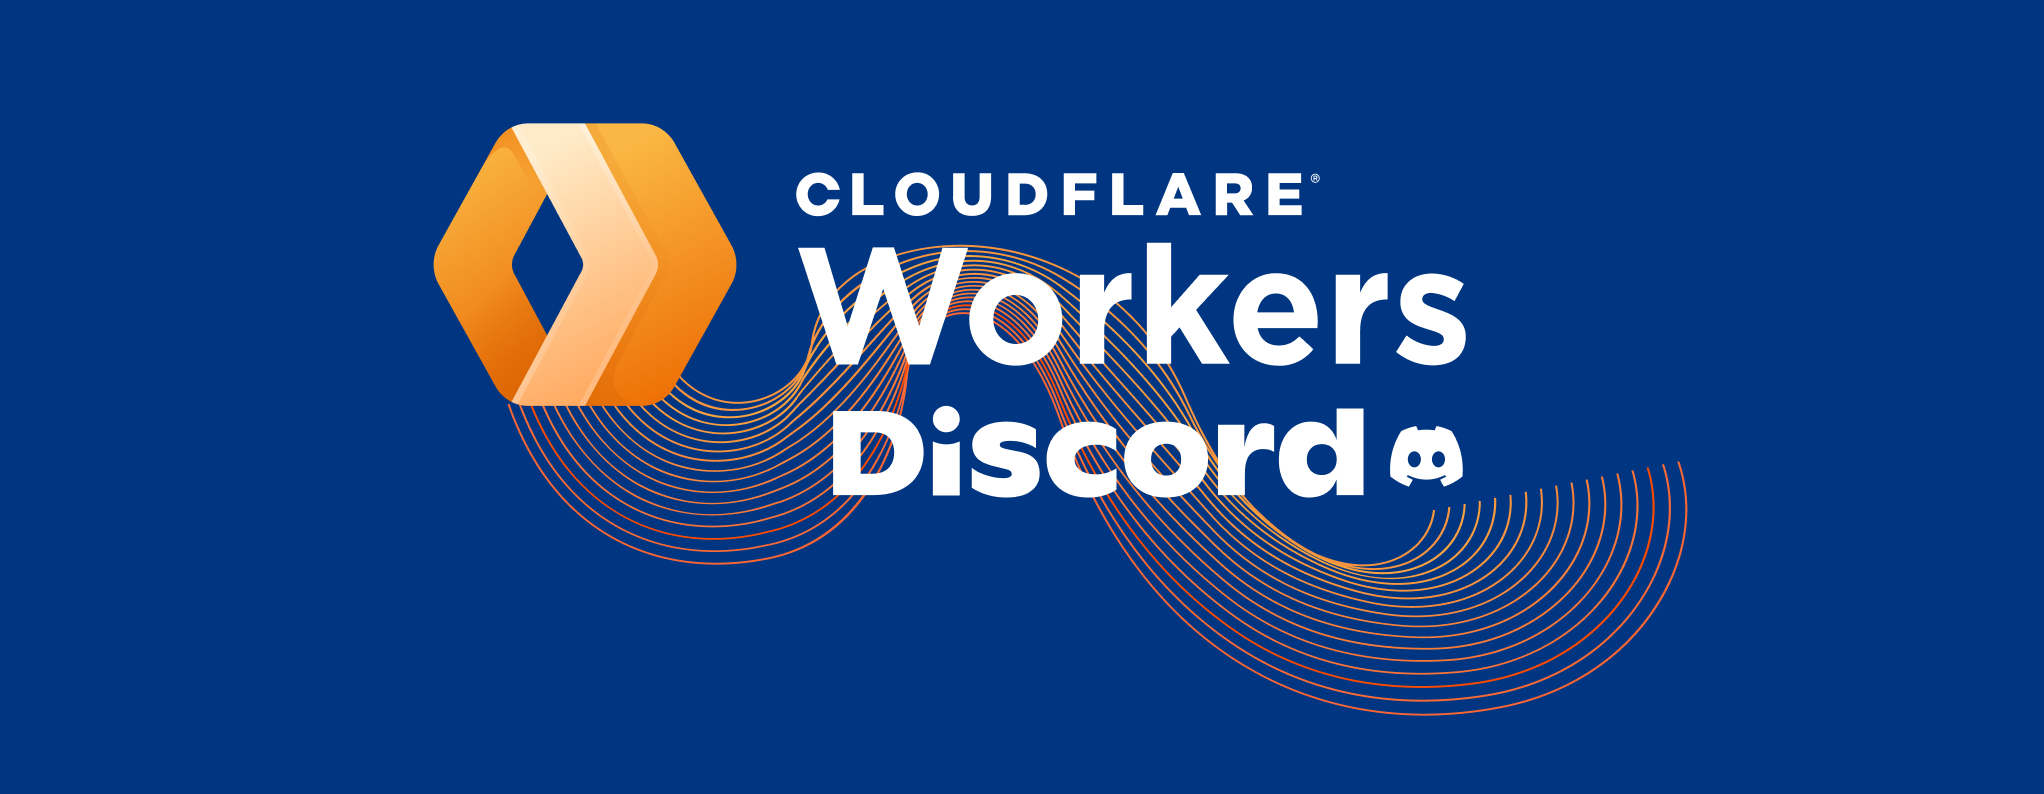 Workers Discord